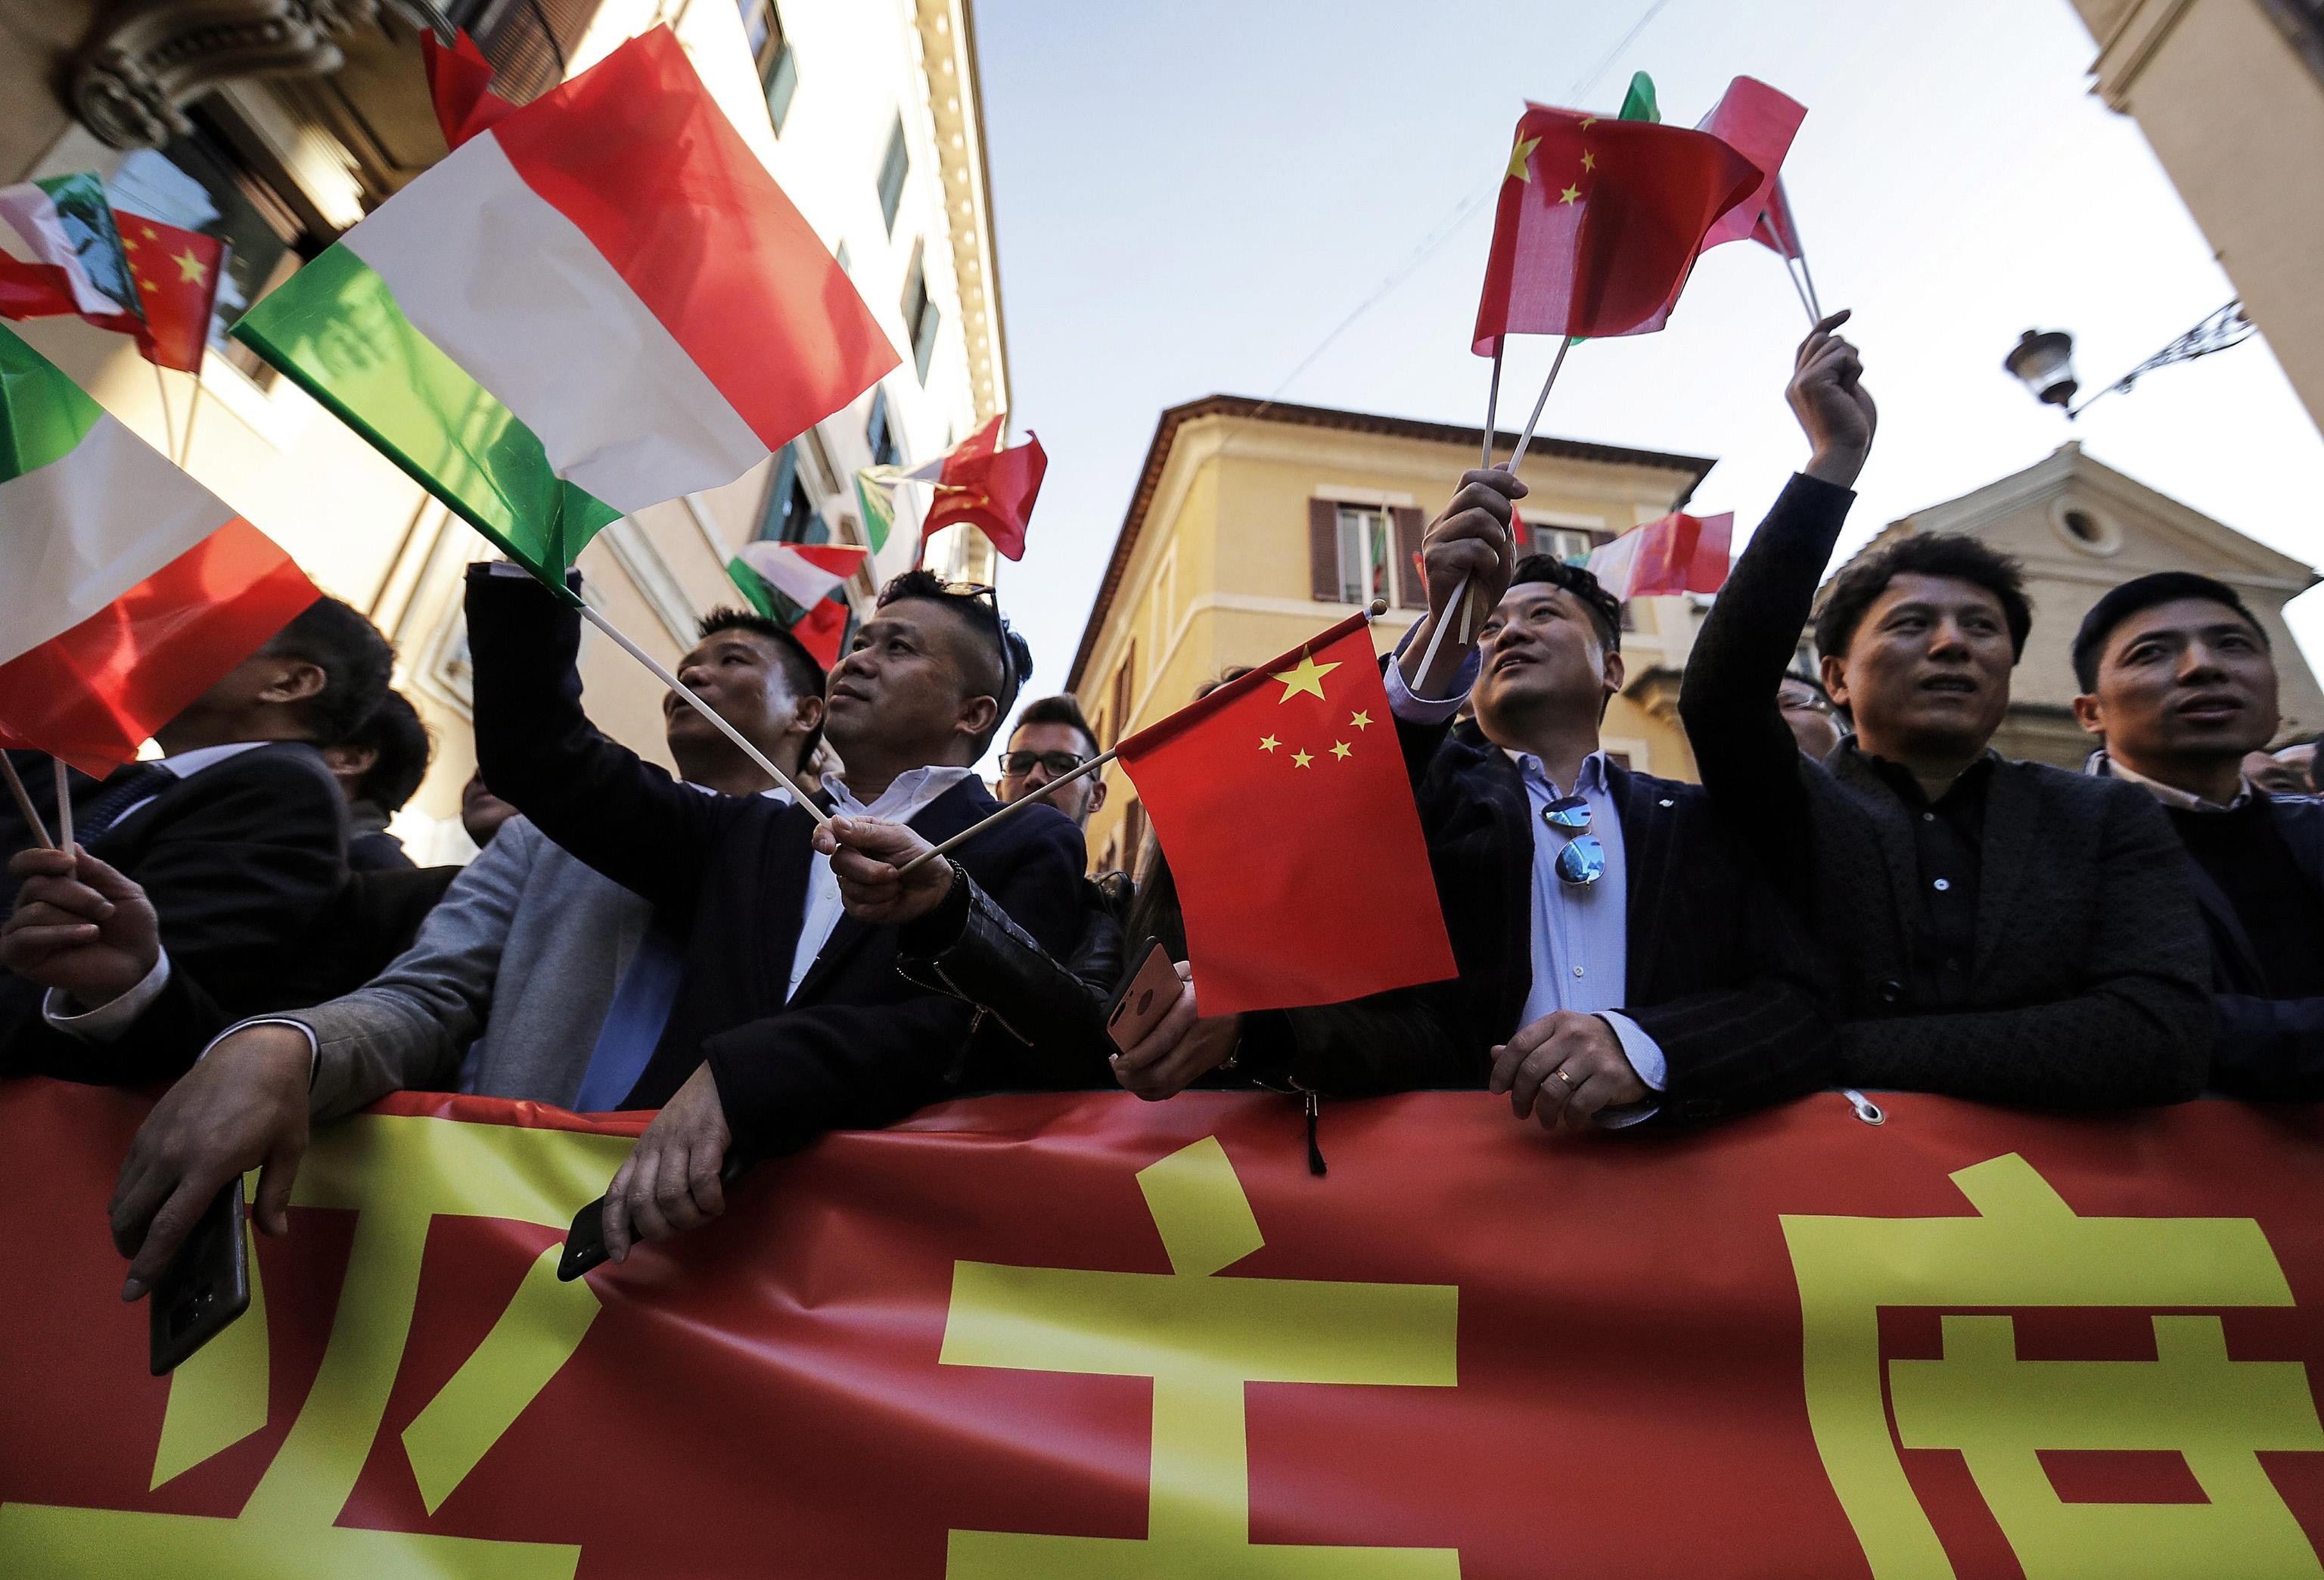 Chinese residents of Italy wave Chinese and Italian flags as they wait for the arrival of Xi Jinping in Rome on March 22. China has long viewed language instruction as a necessary component for achieving diplomacy and trade goals, and the Belt and Road Initiative has resulted in a wave of new languages as majors. Photo: EPA-EFE